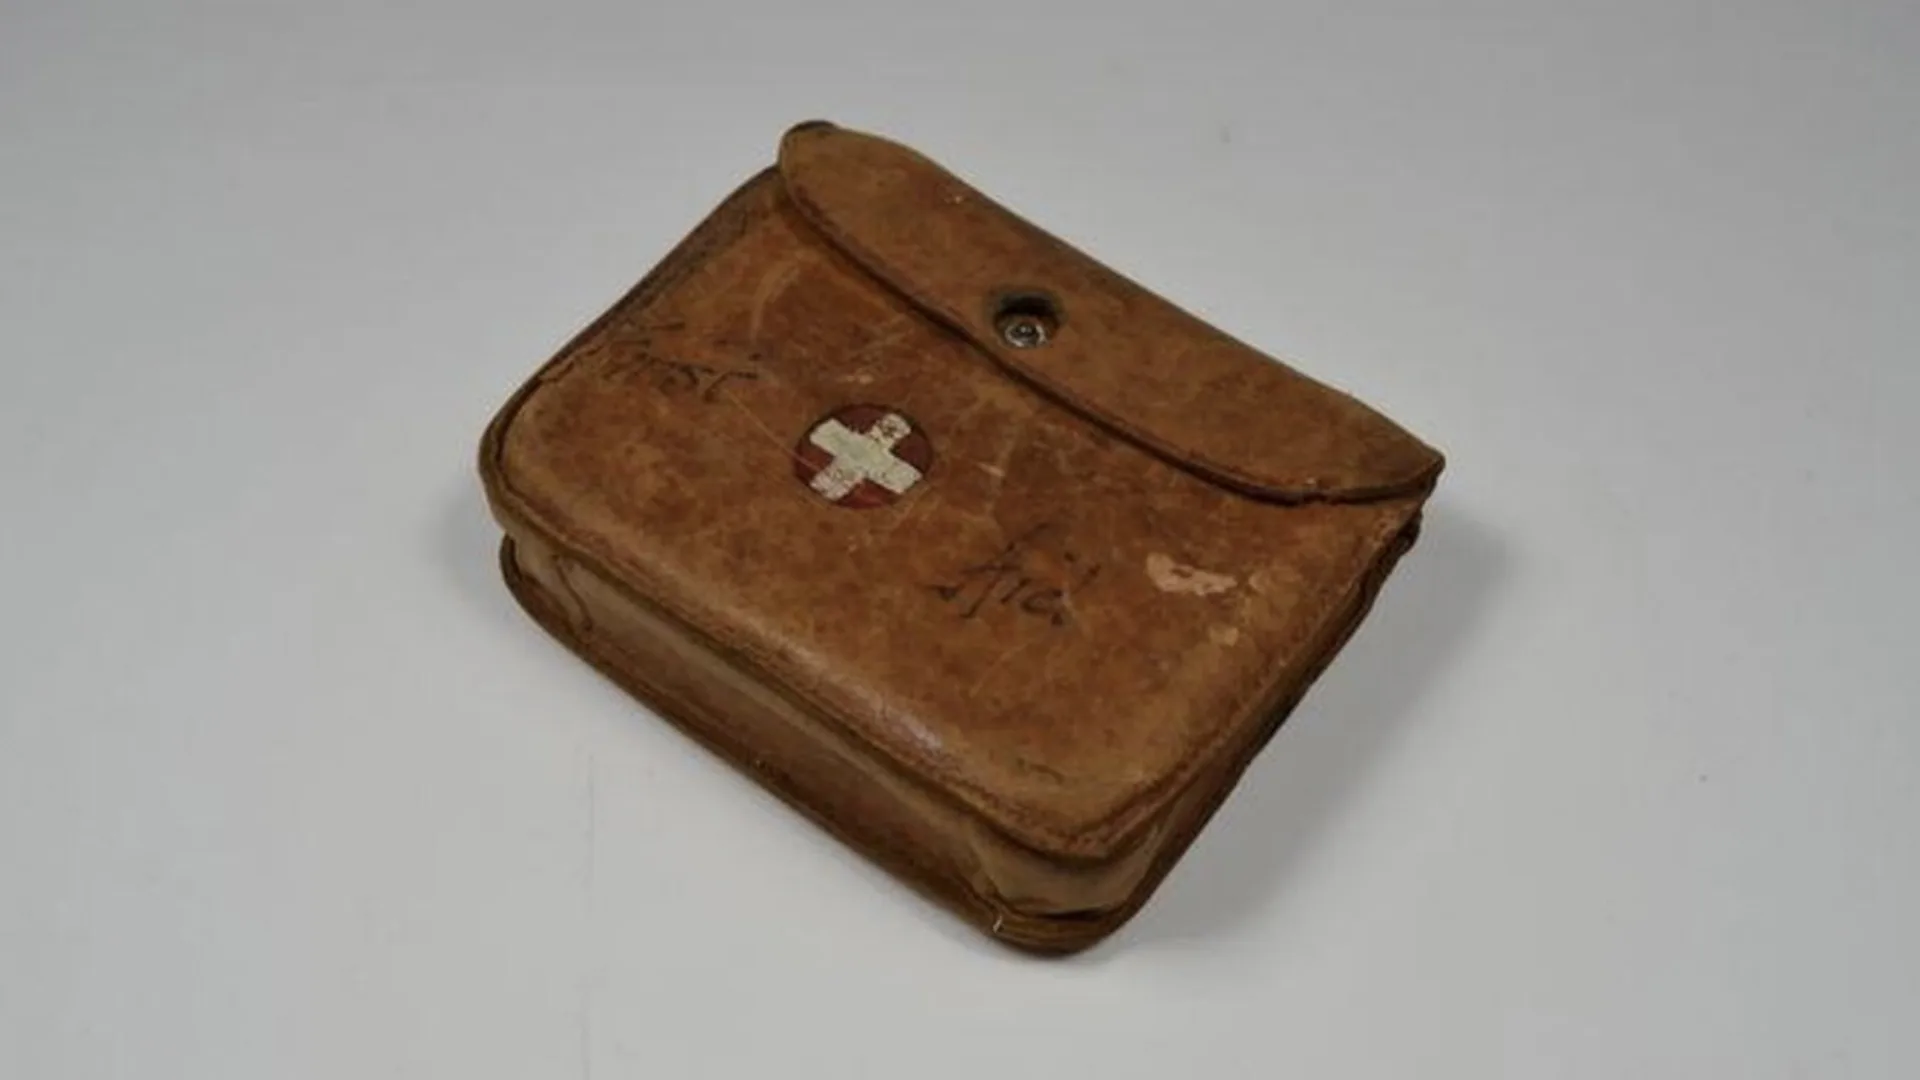 First aid kit in a brown leather pouch